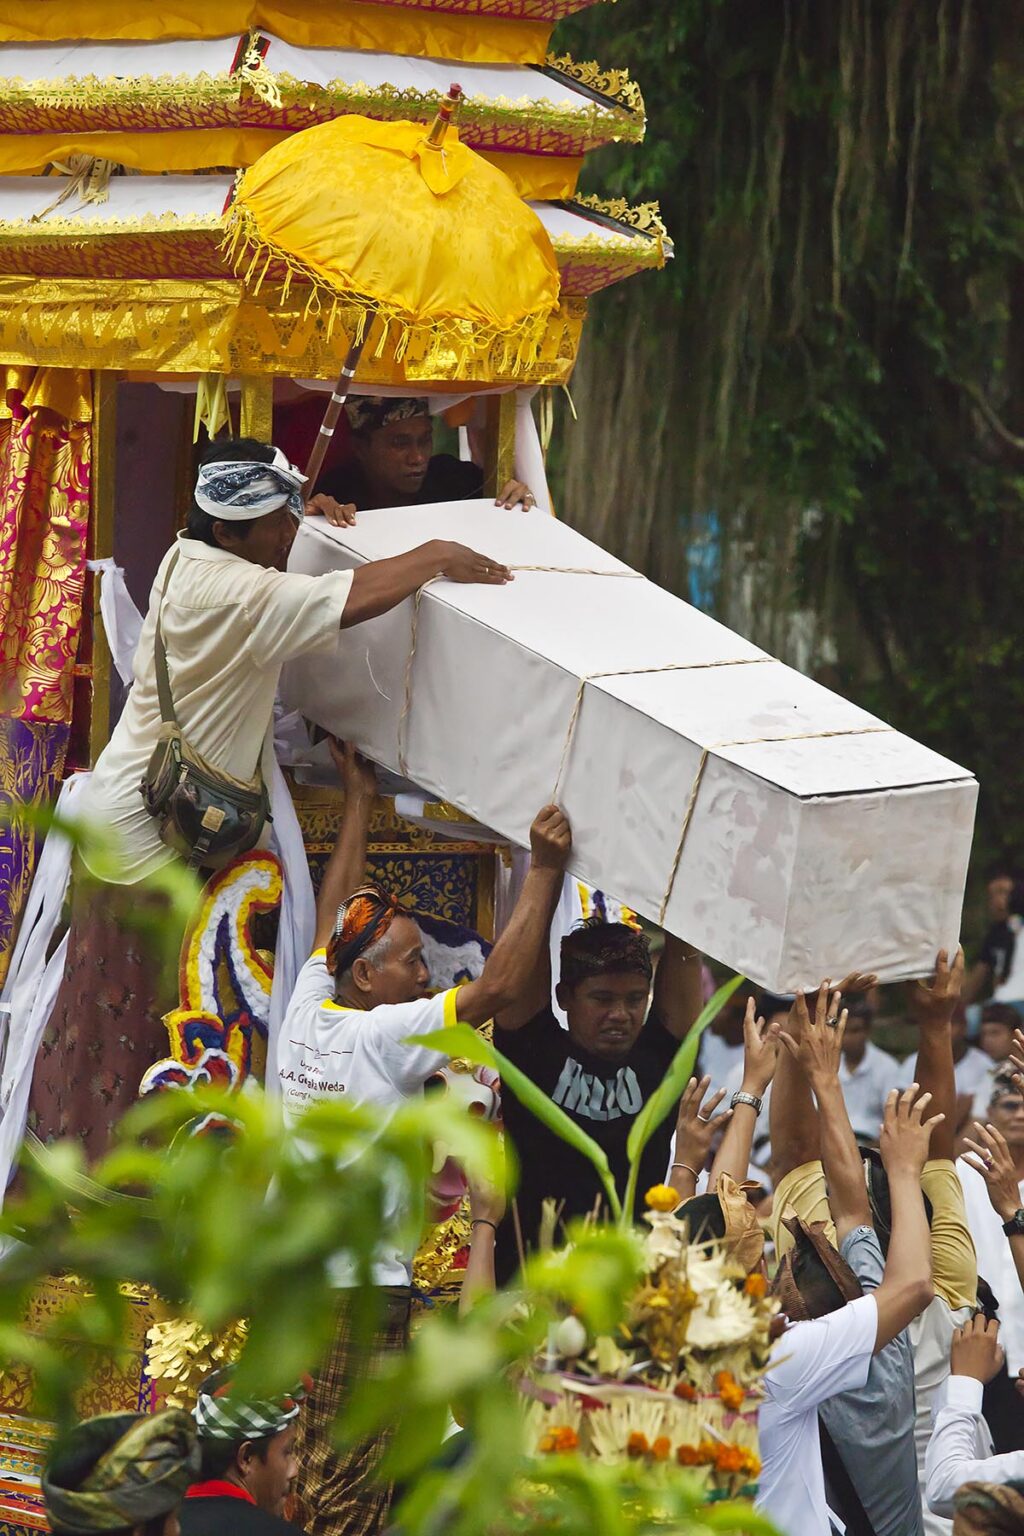 A Hindu style CREMATION PROCESSION where the dead body is transported in a pagoda - UBUD, BALI, INDONESIA